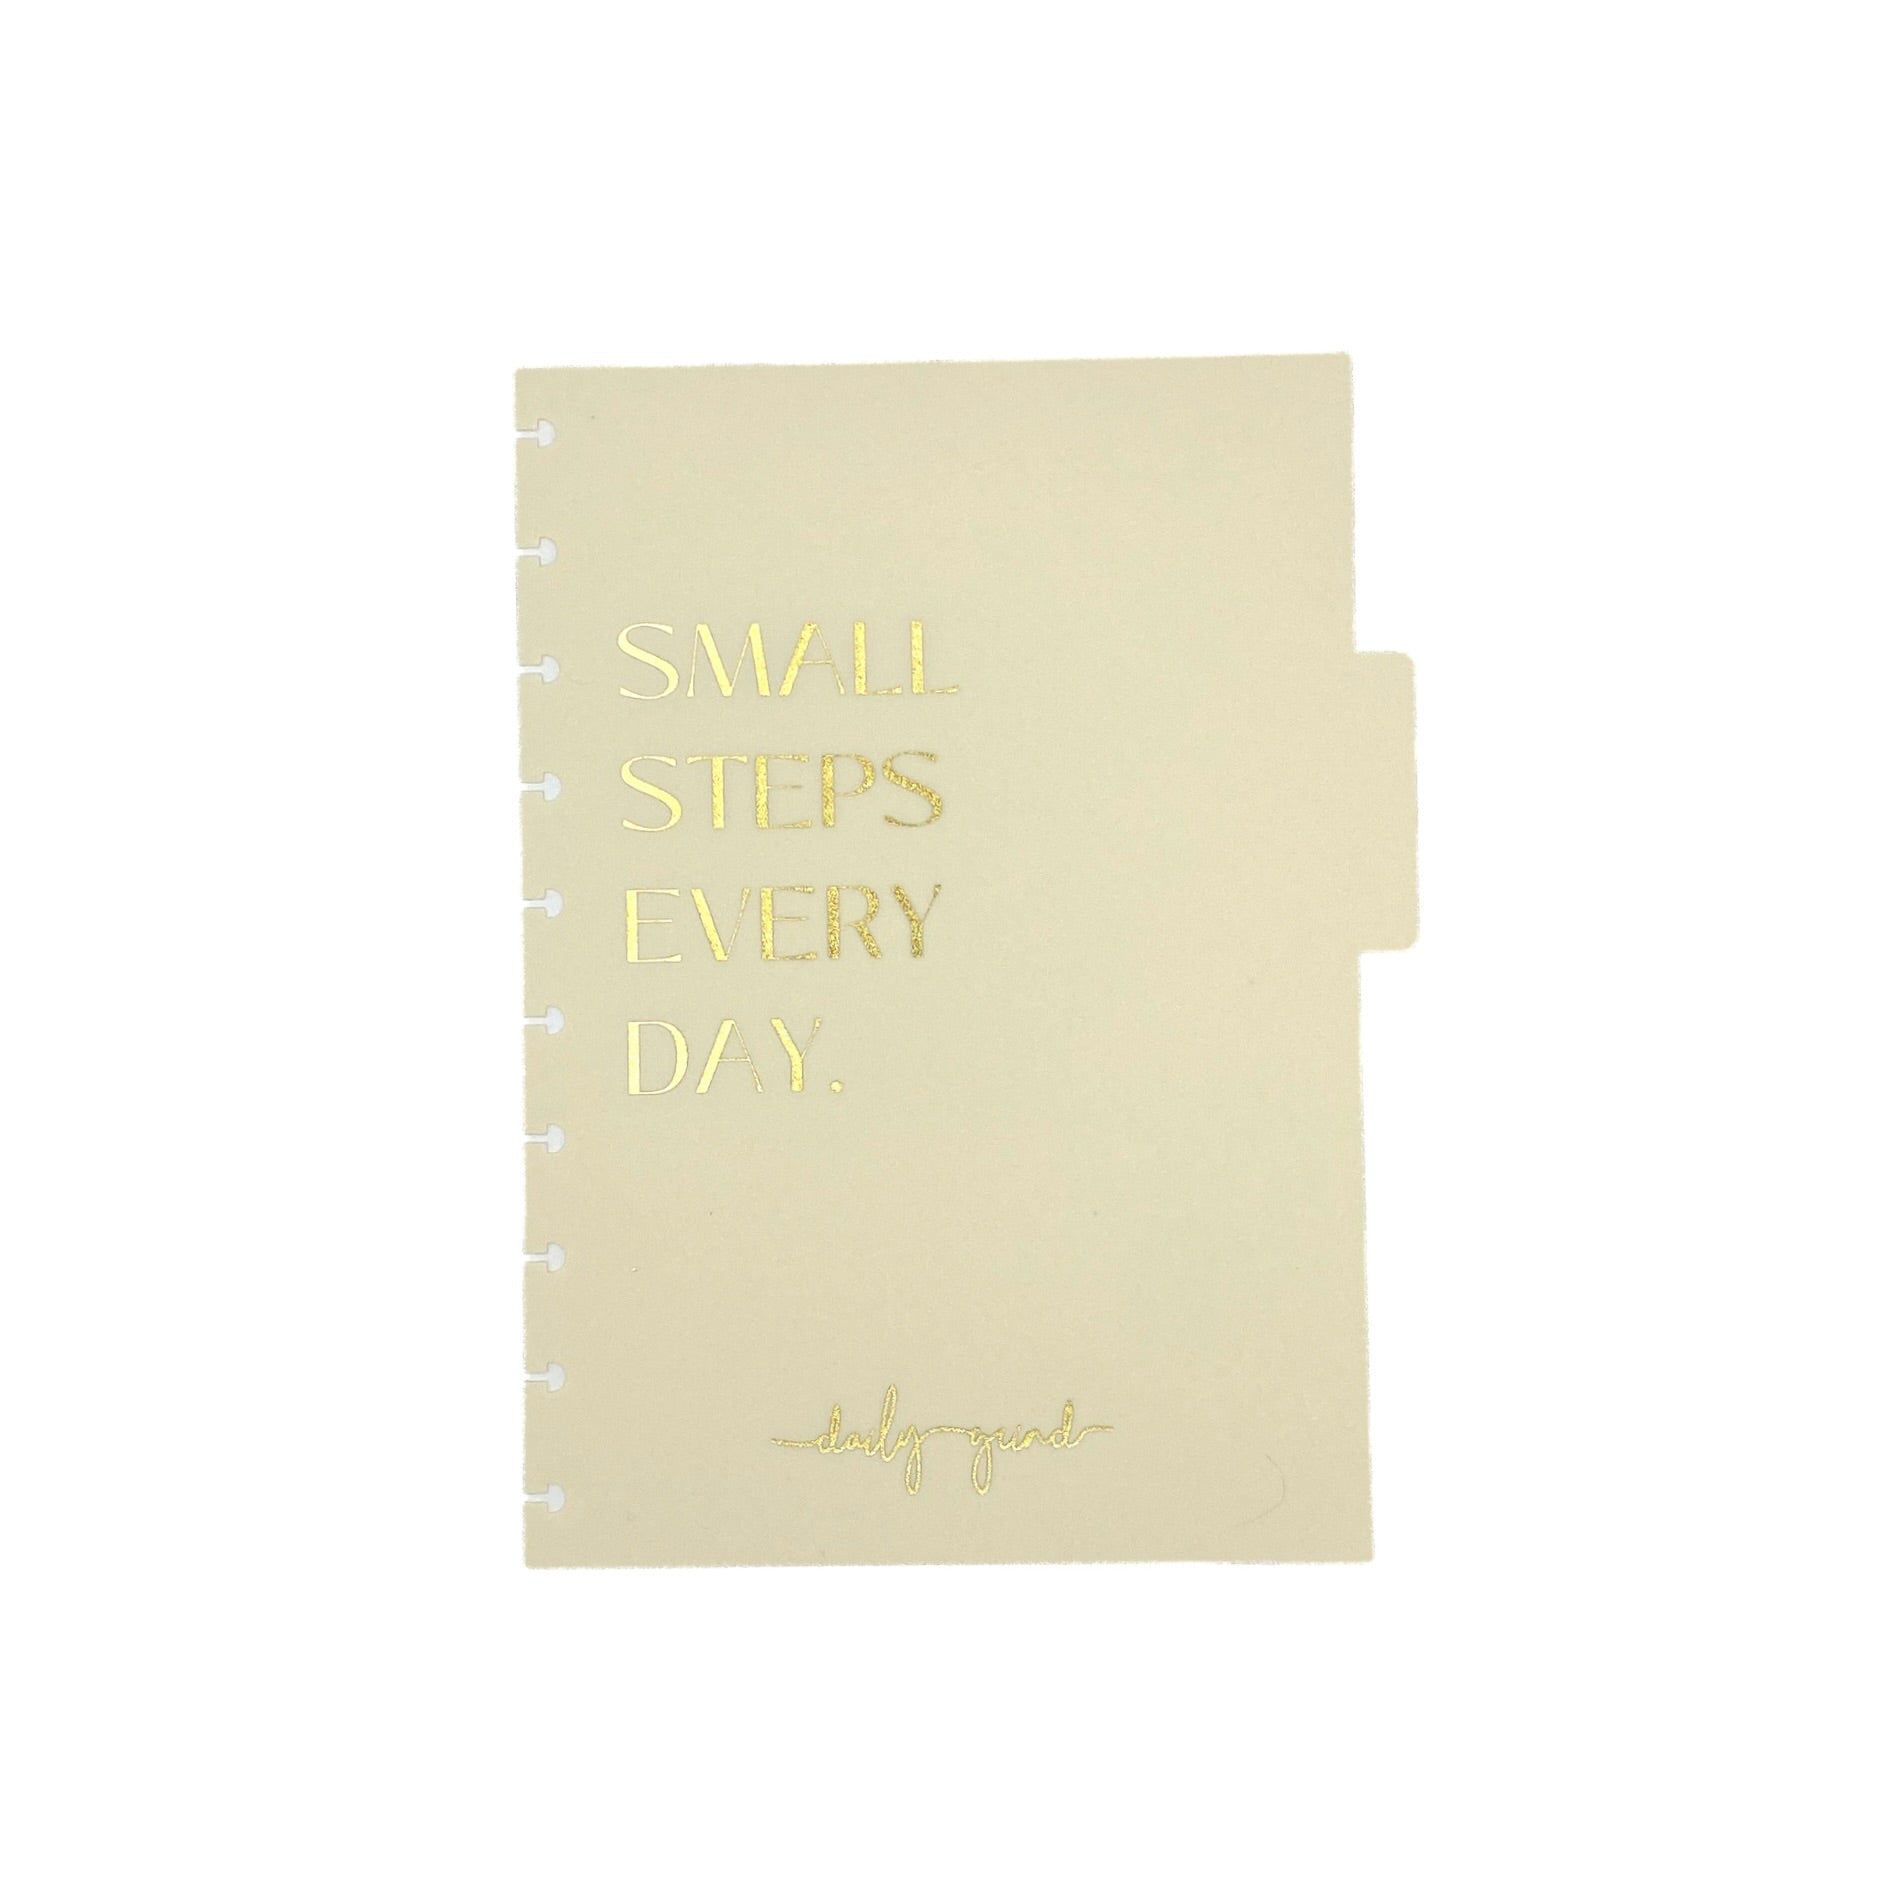 "Small steps every day" cream planner divider